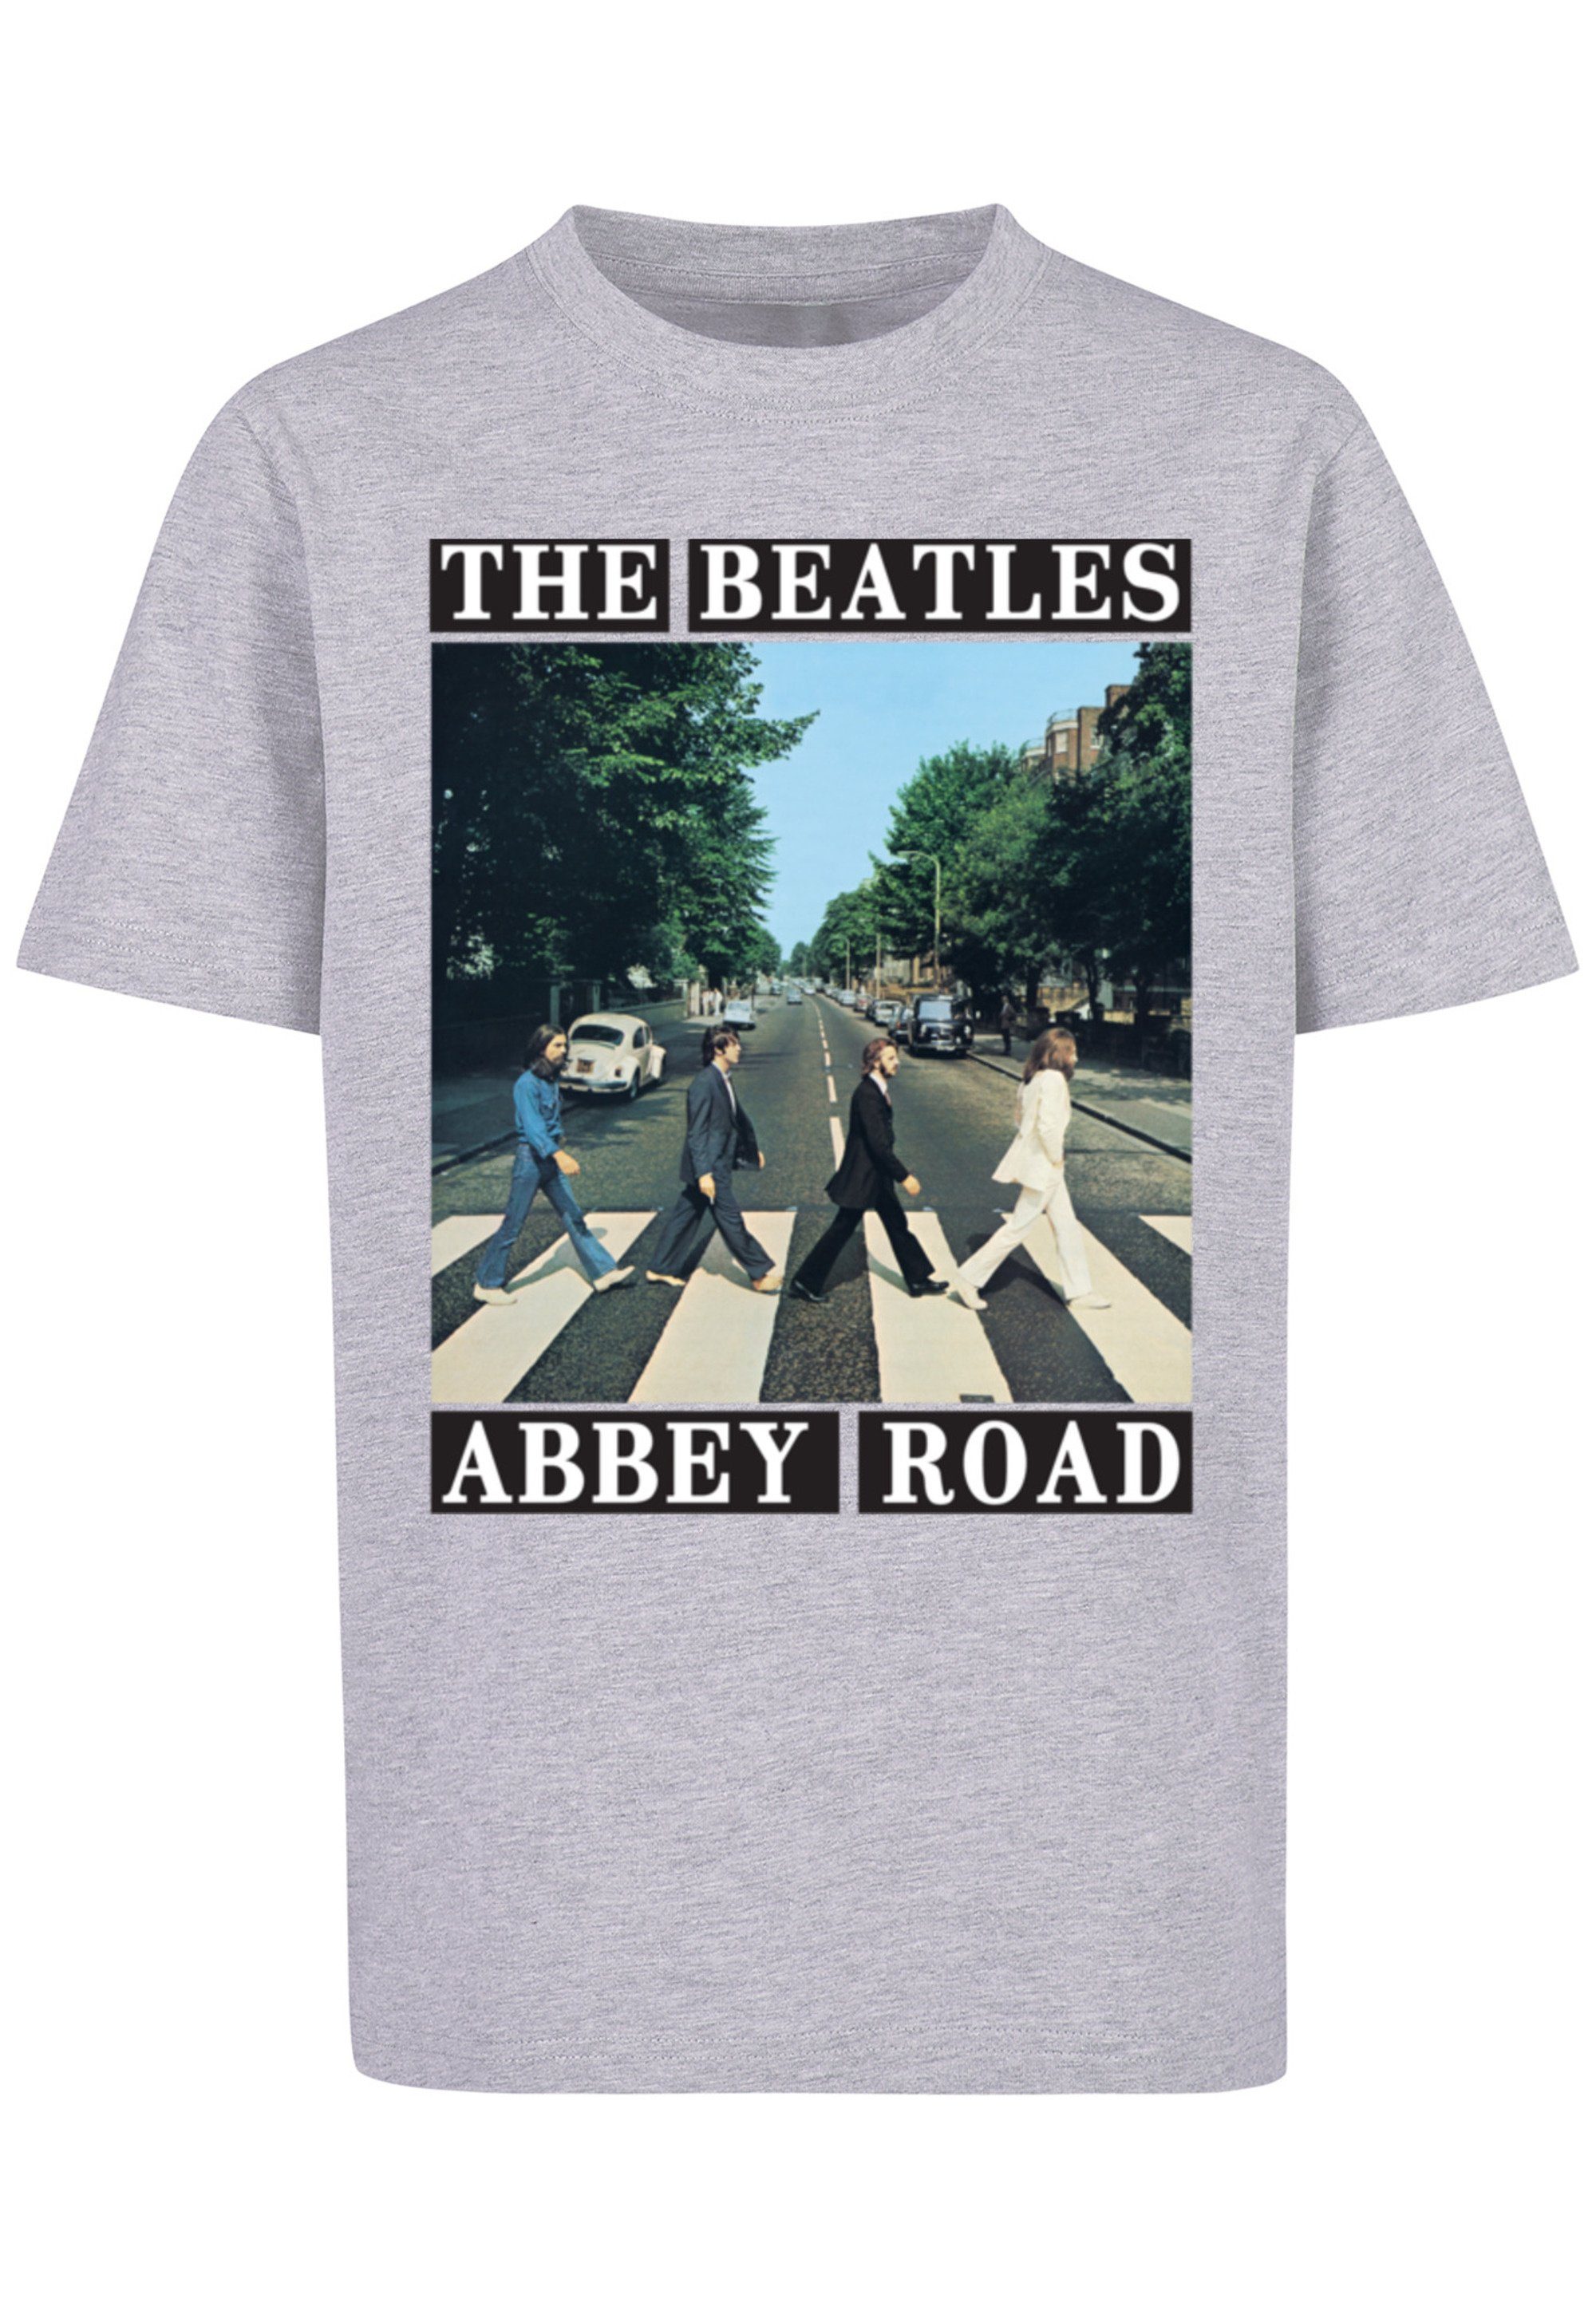 Road Band Print grey T-Shirt Beatles Abbey The heather F4NT4STIC